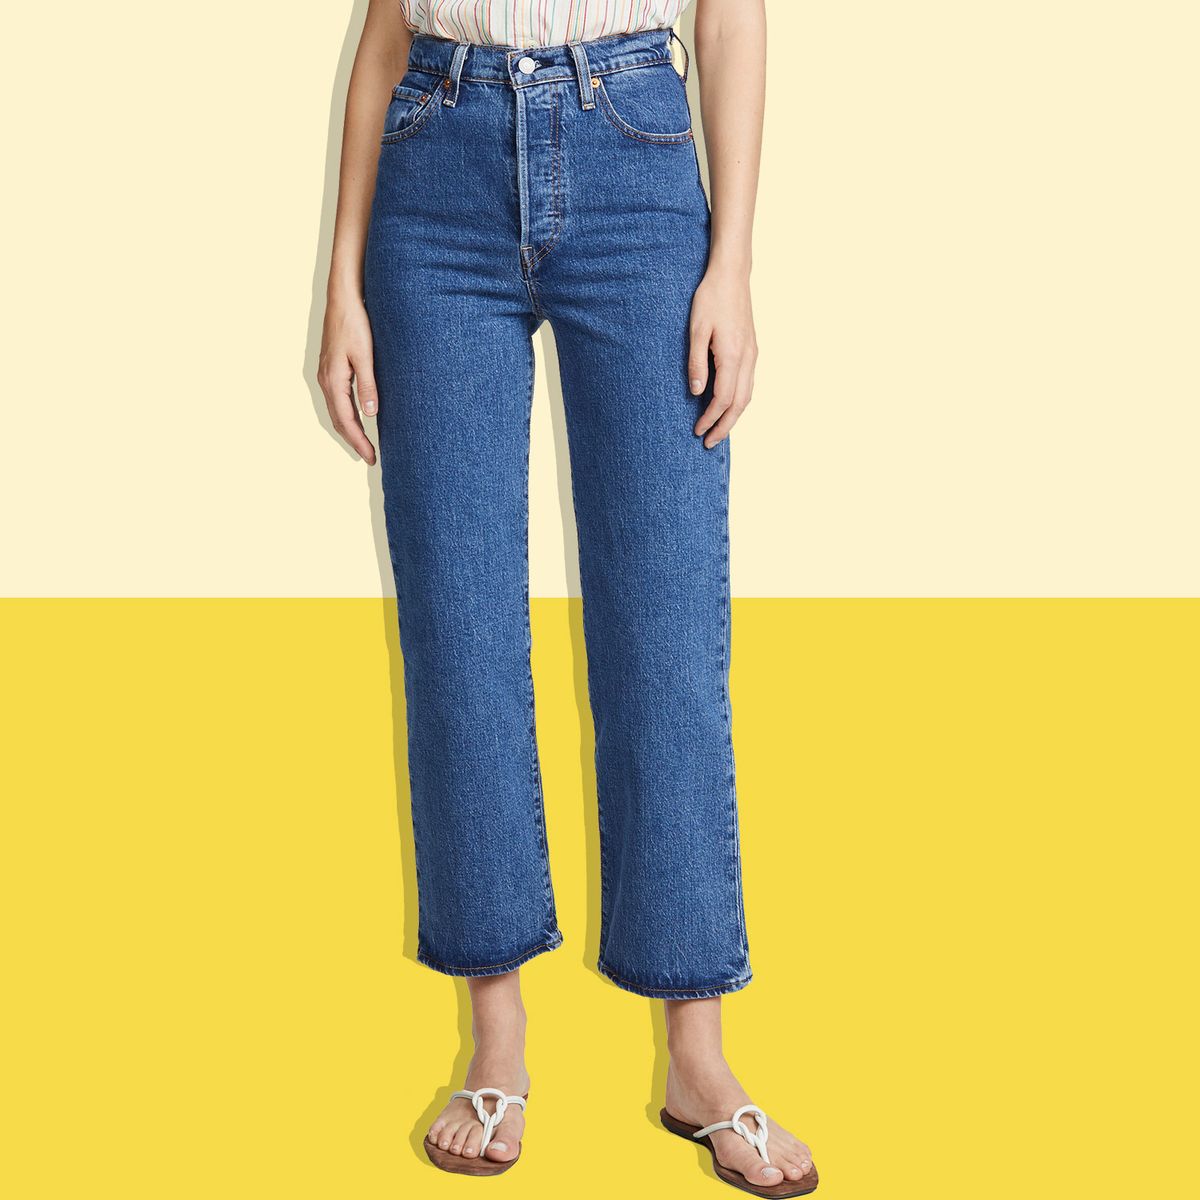 bungeejumpen Comorama luister Levi's Ribcage Straight Ankle Jeans on Sale at Shopbop | The Strategist